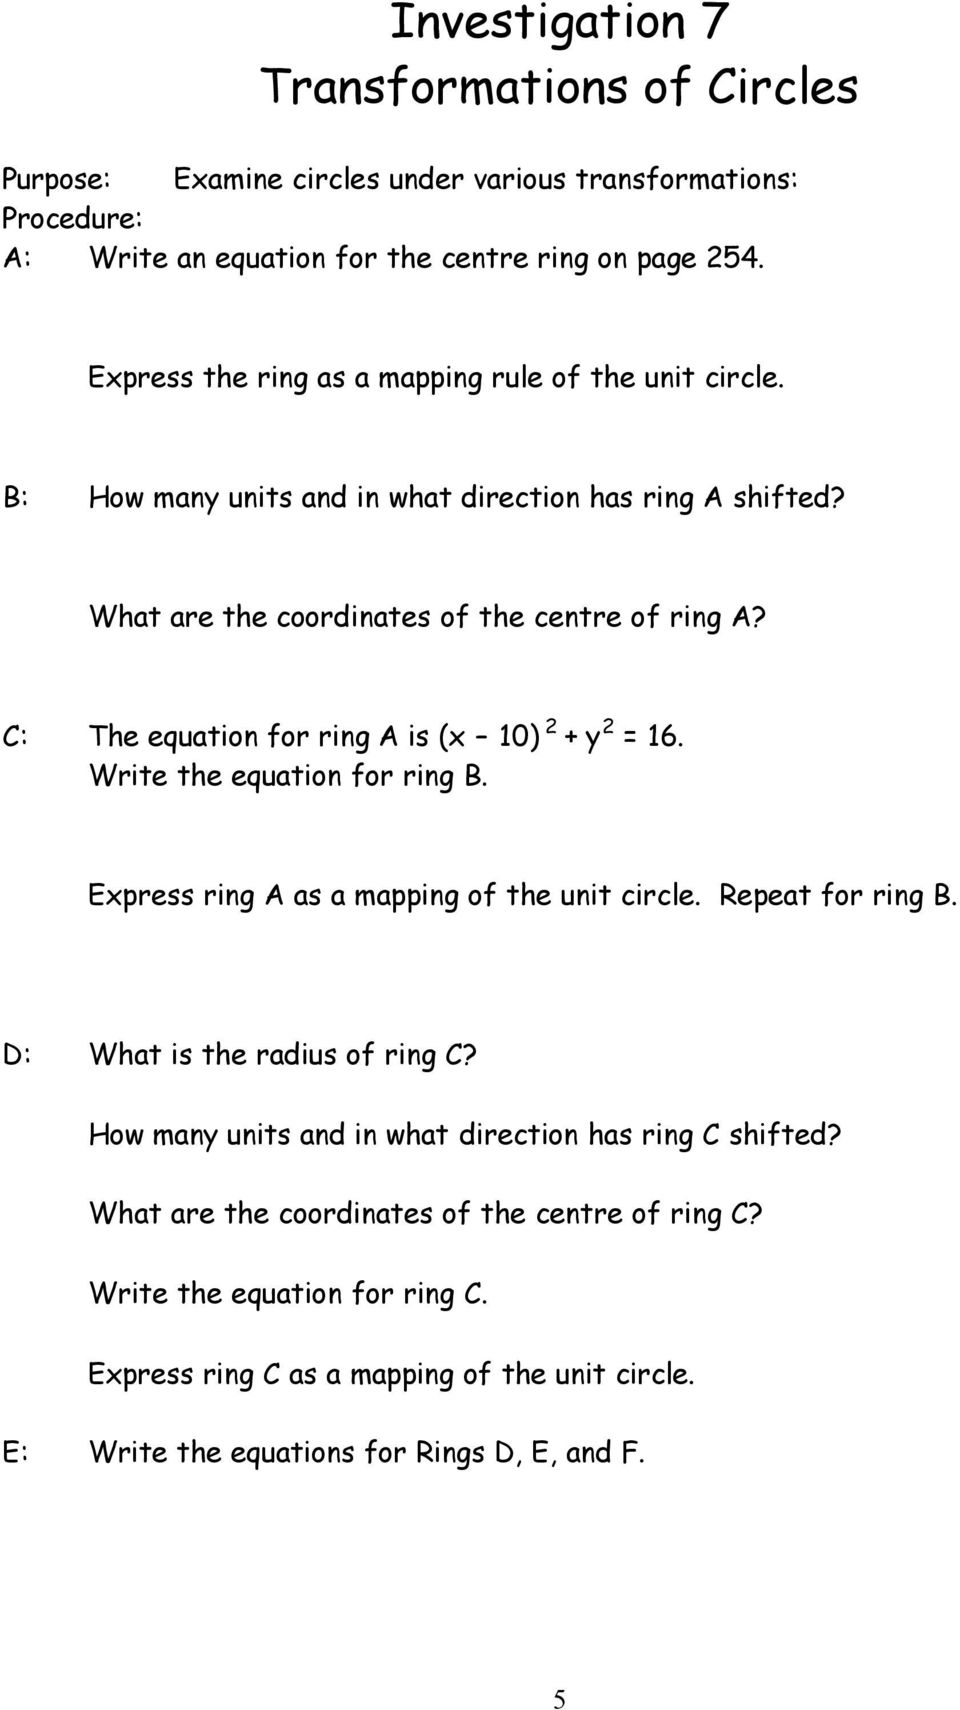 C: The equation for ring A is (x ) + y = 1. Write the equation for ring B. Express ring A as a mapping of the unit circle. Repeat for ring B. D: What is the radius of ring C?